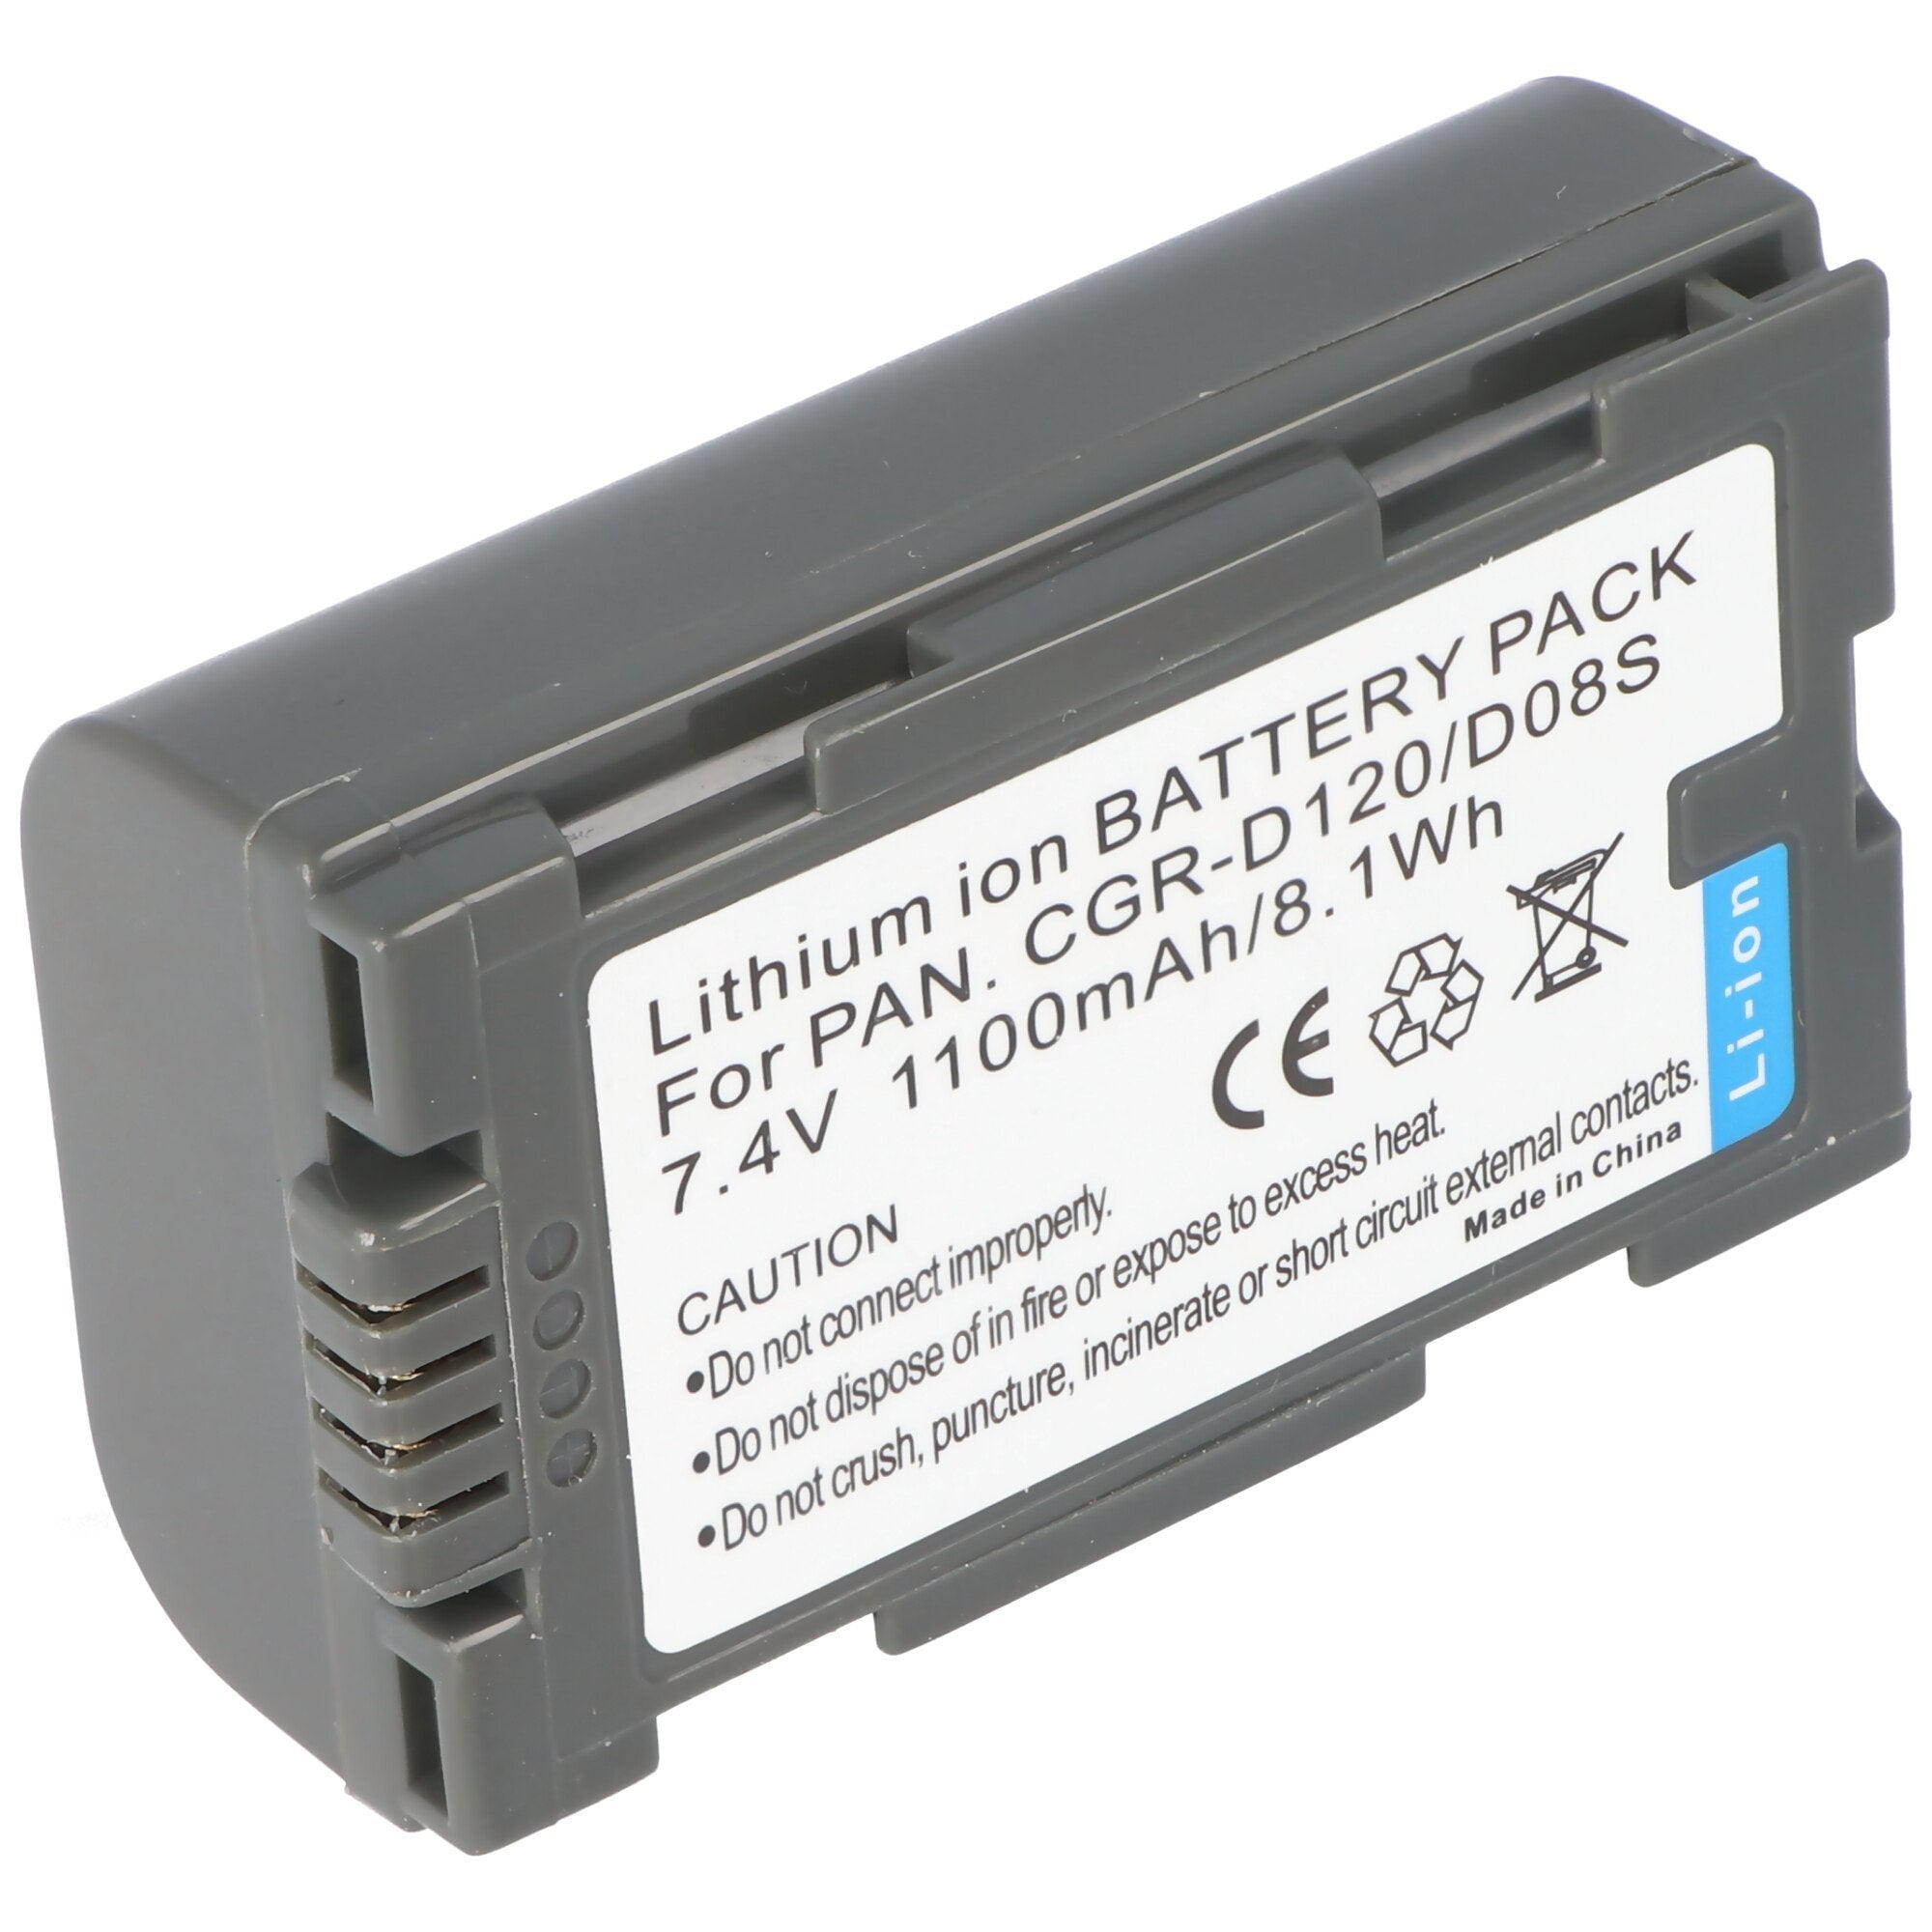 AccuCell battery suitable for Panasonic CGR-D120, CGR-D08, CGP-D14